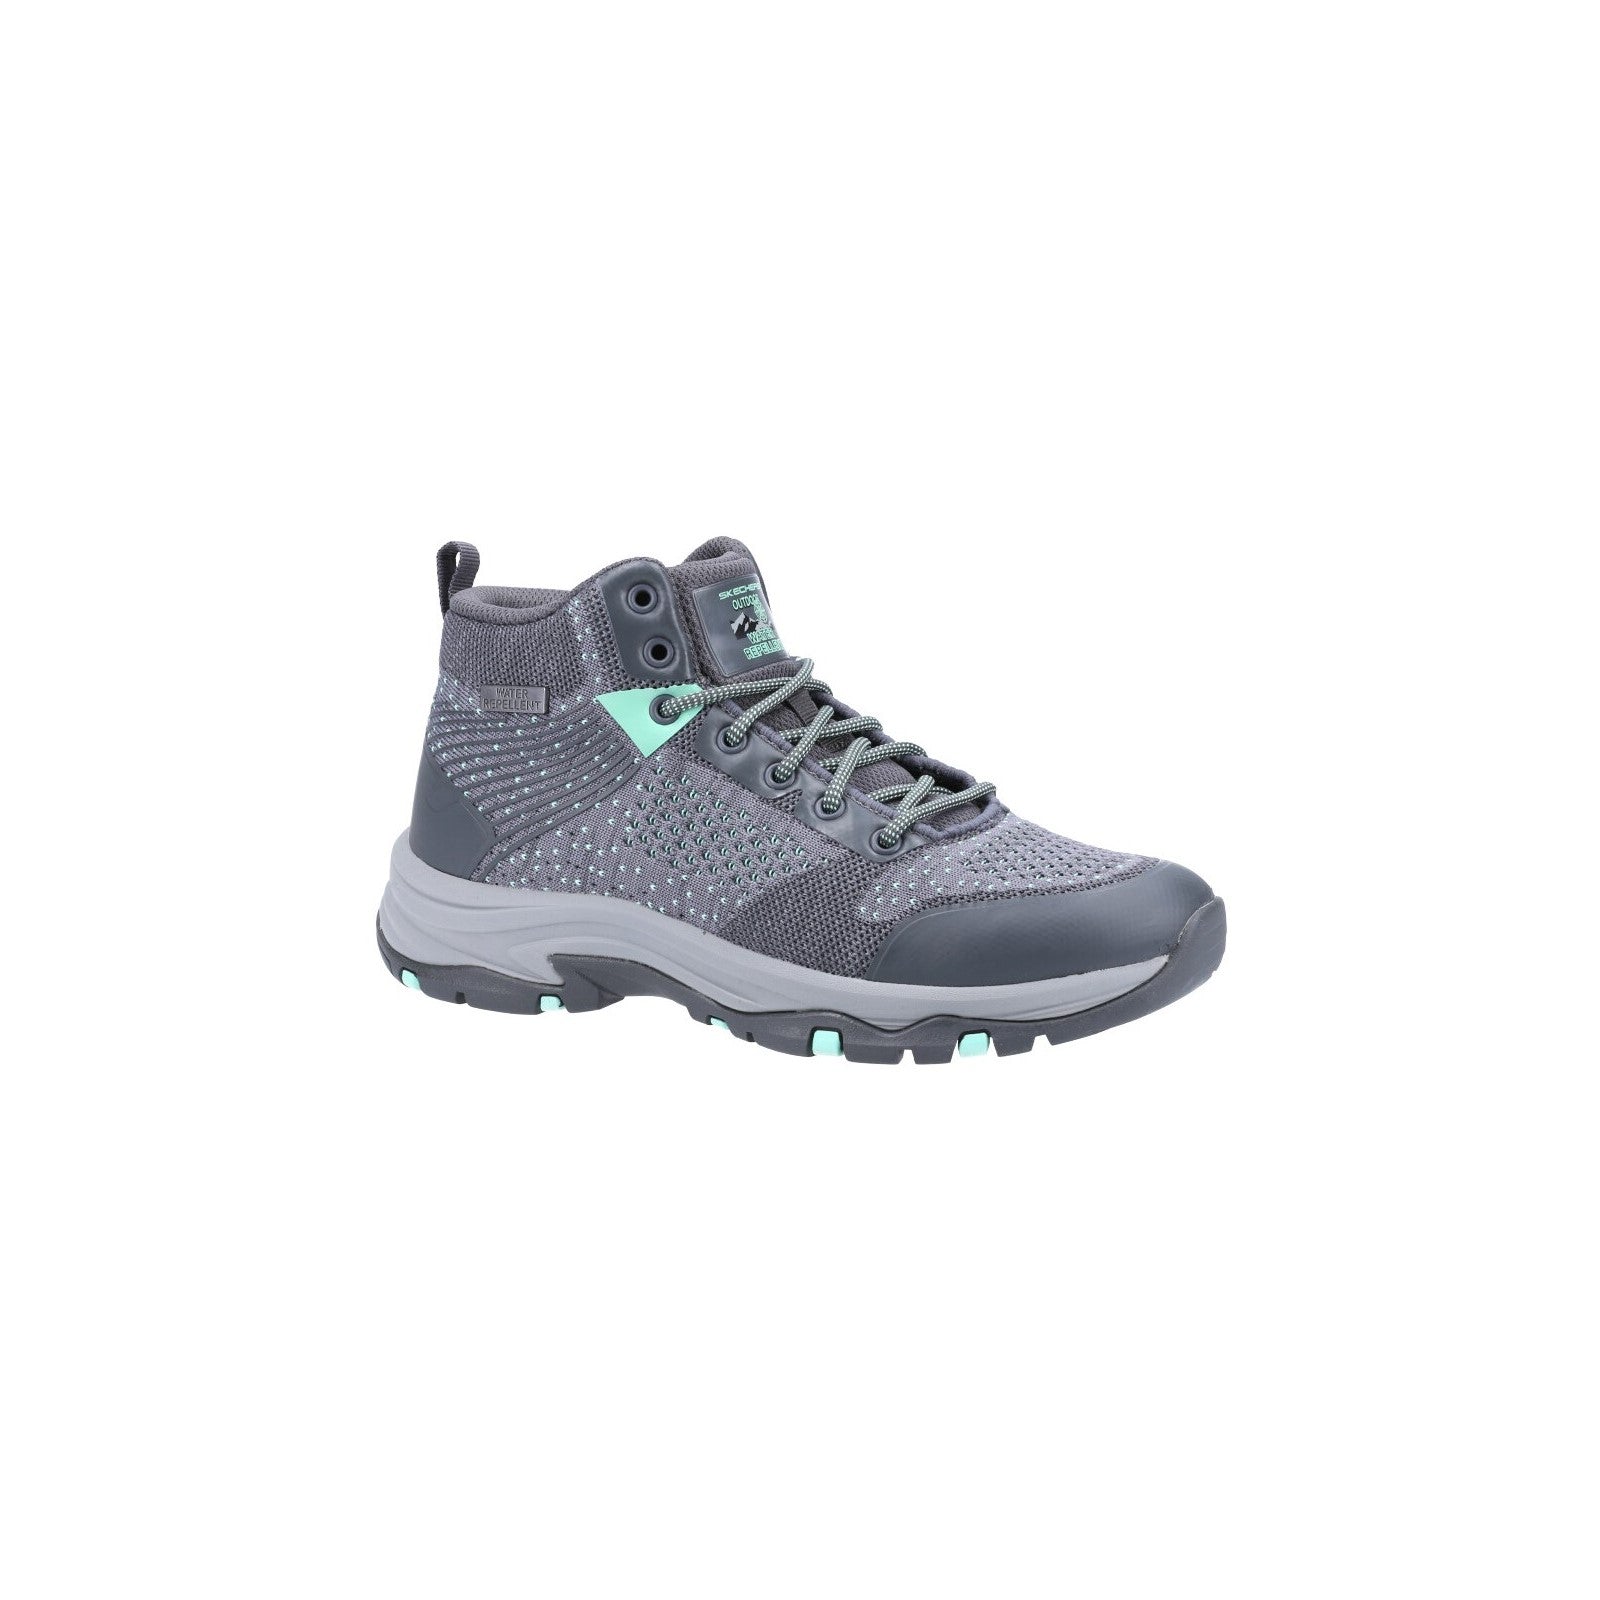 Skechers Trego Hiking Boots